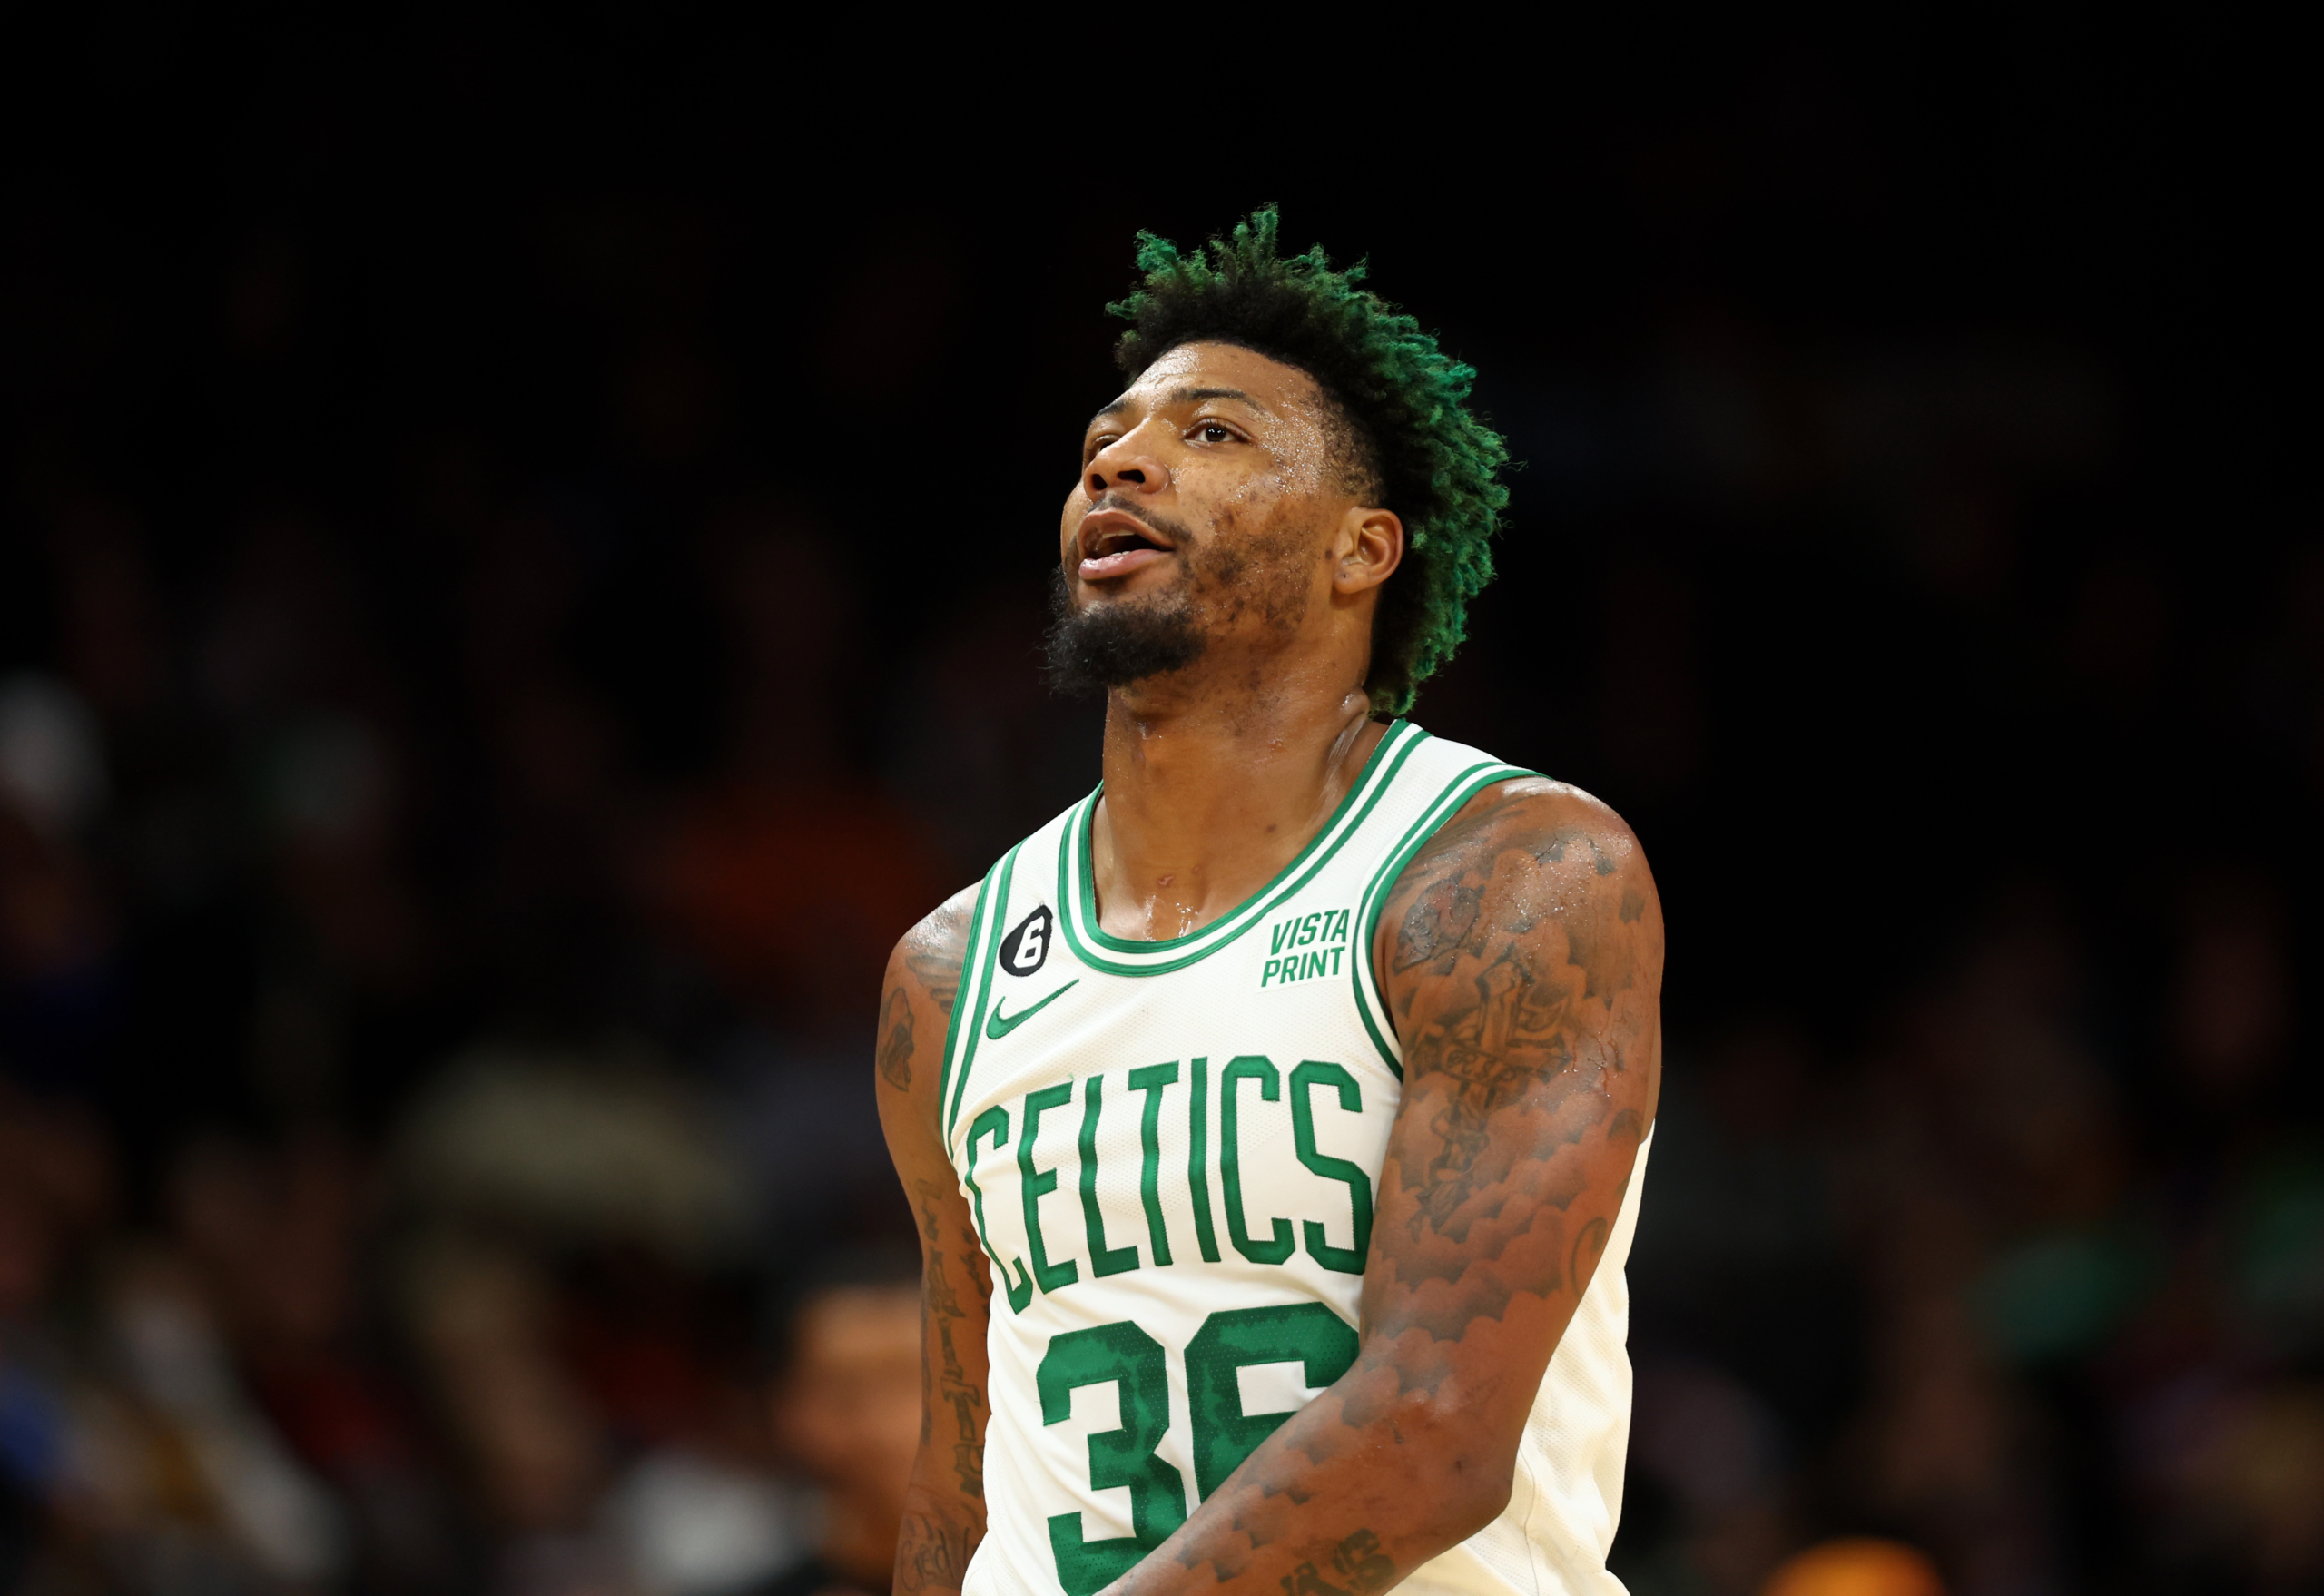 Marcus Smart trade: It was complicated between him and the Celtics